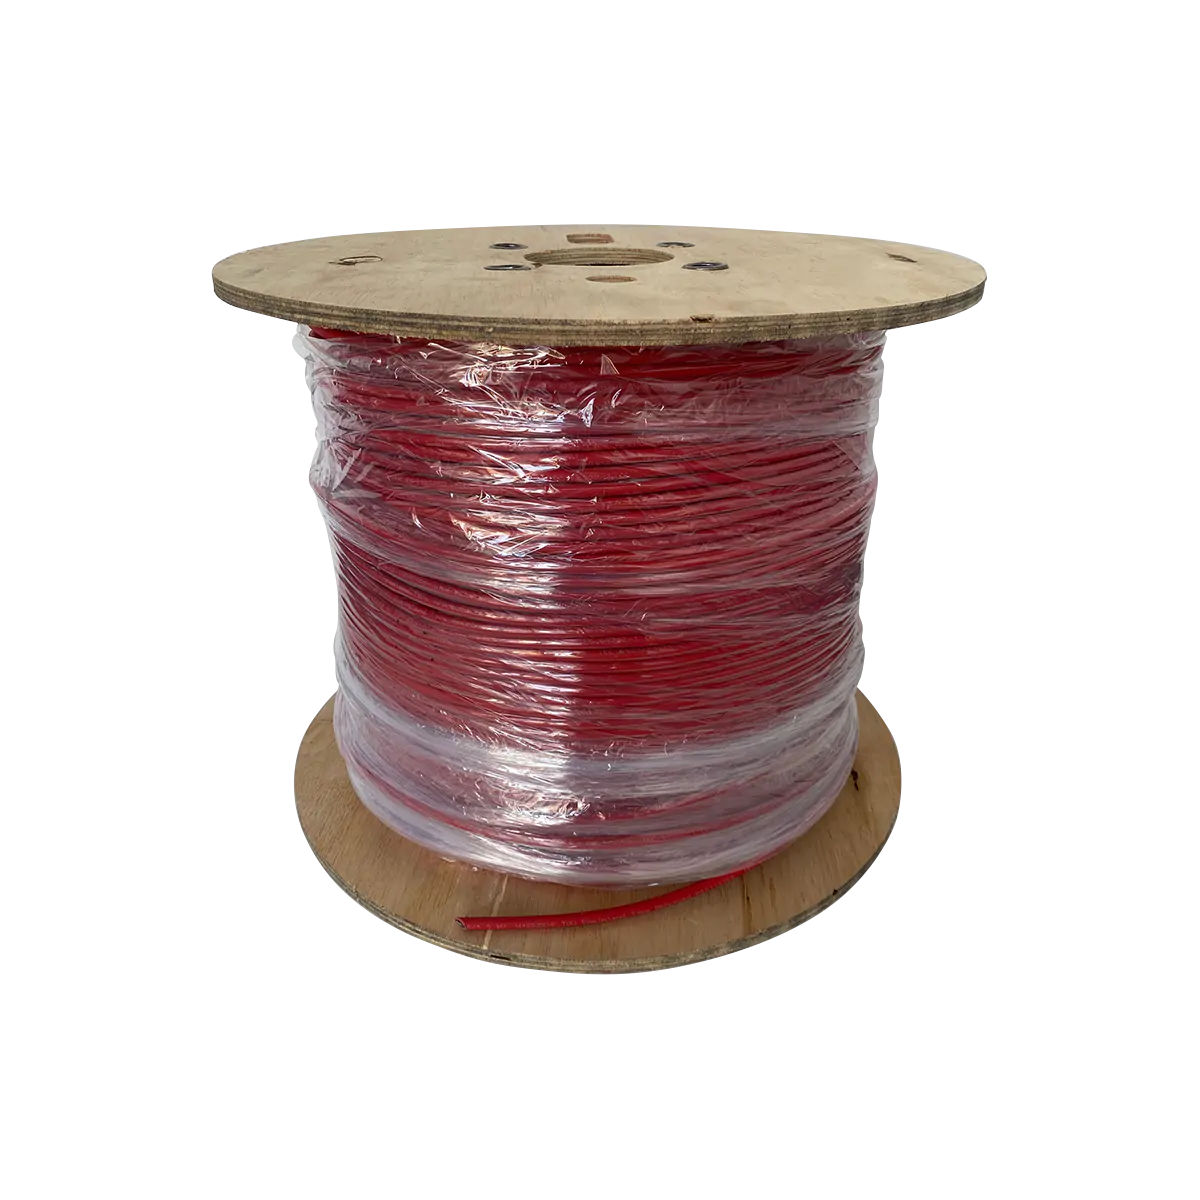 Athilex cable 6mm Red 500 Meters